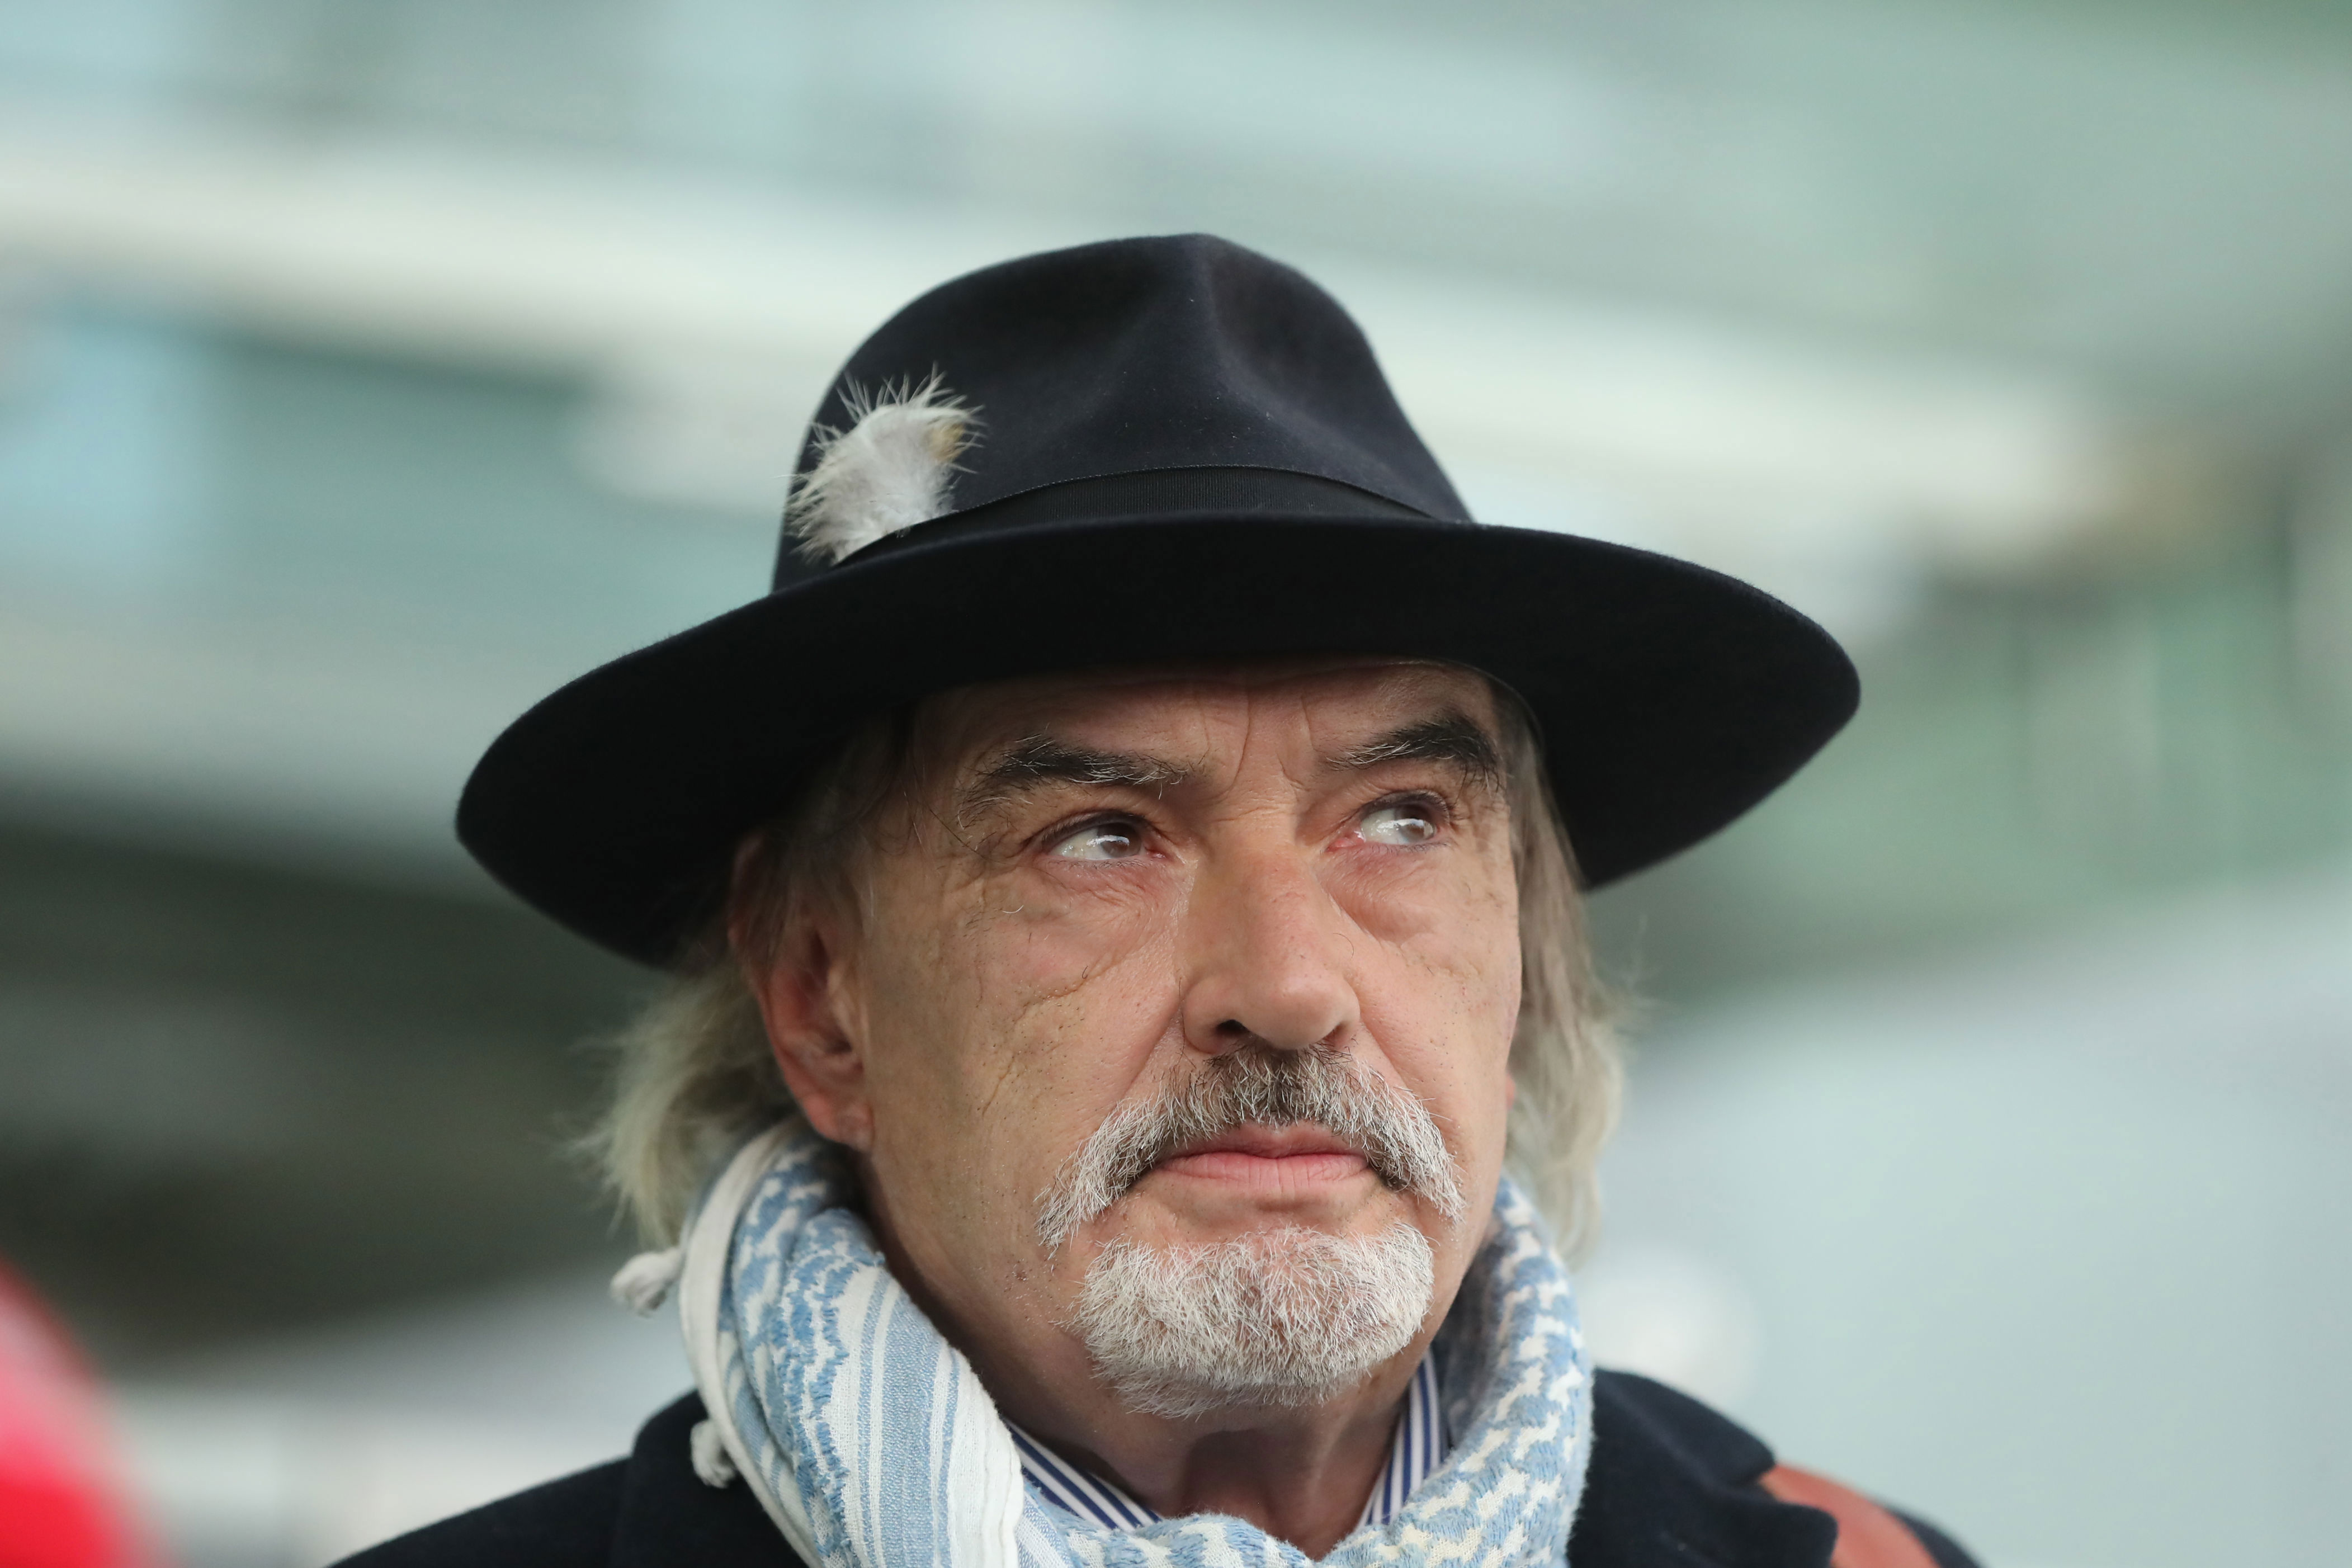 Ian Bailey’s home searched in Sophie Toscan du Plantier murder probe